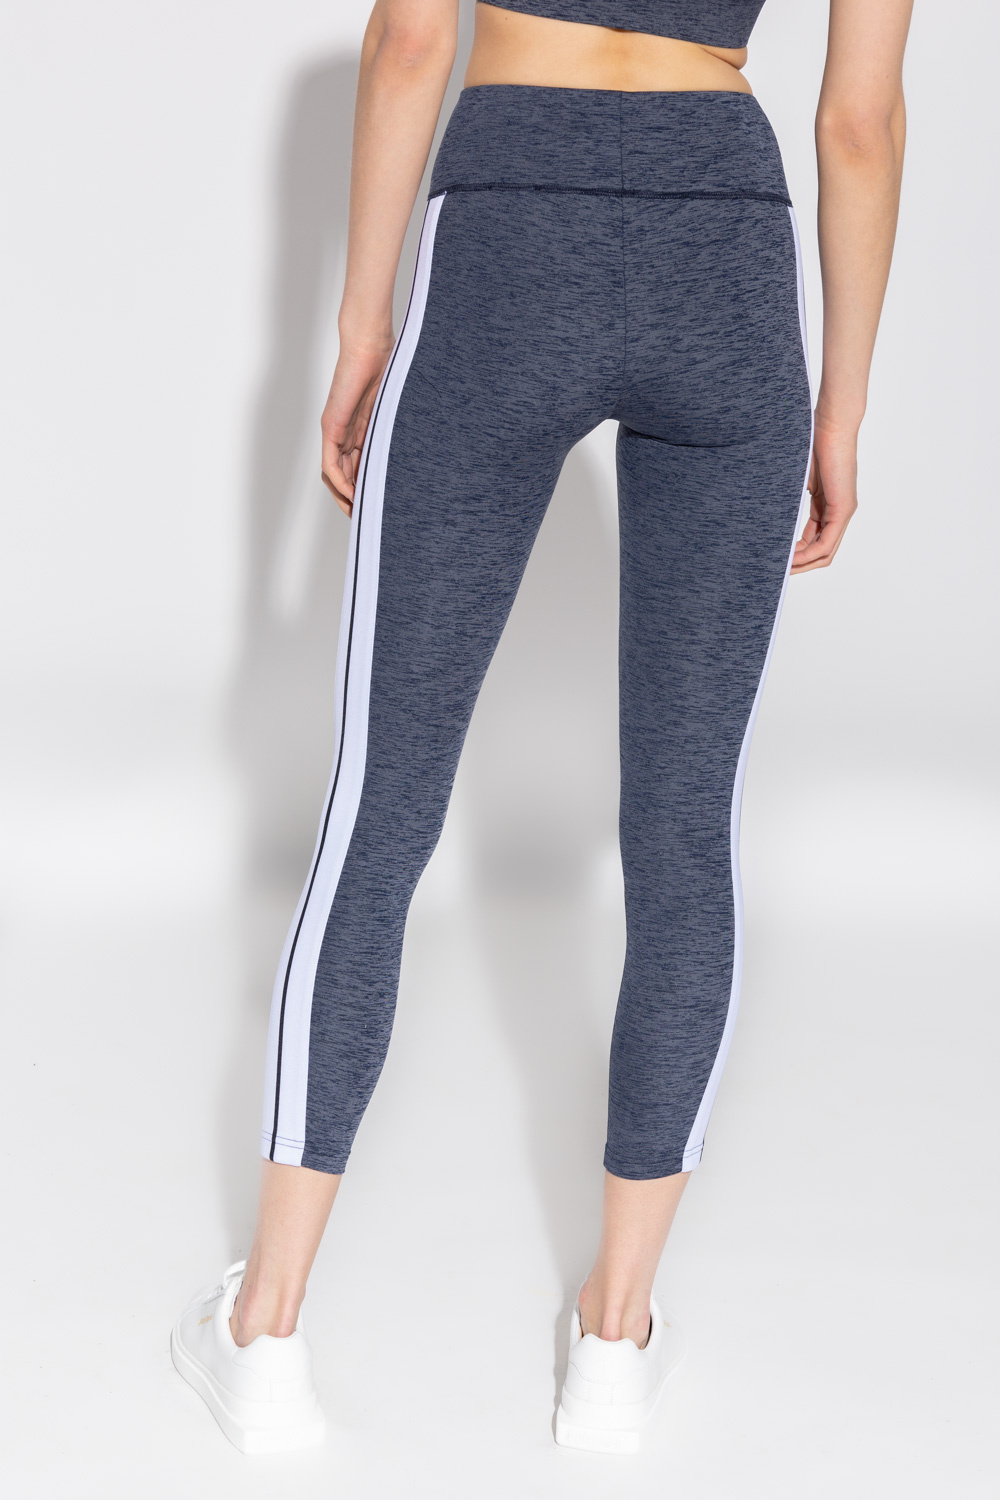 LOGO LEGGINGS in blue - Palm Angels® Official